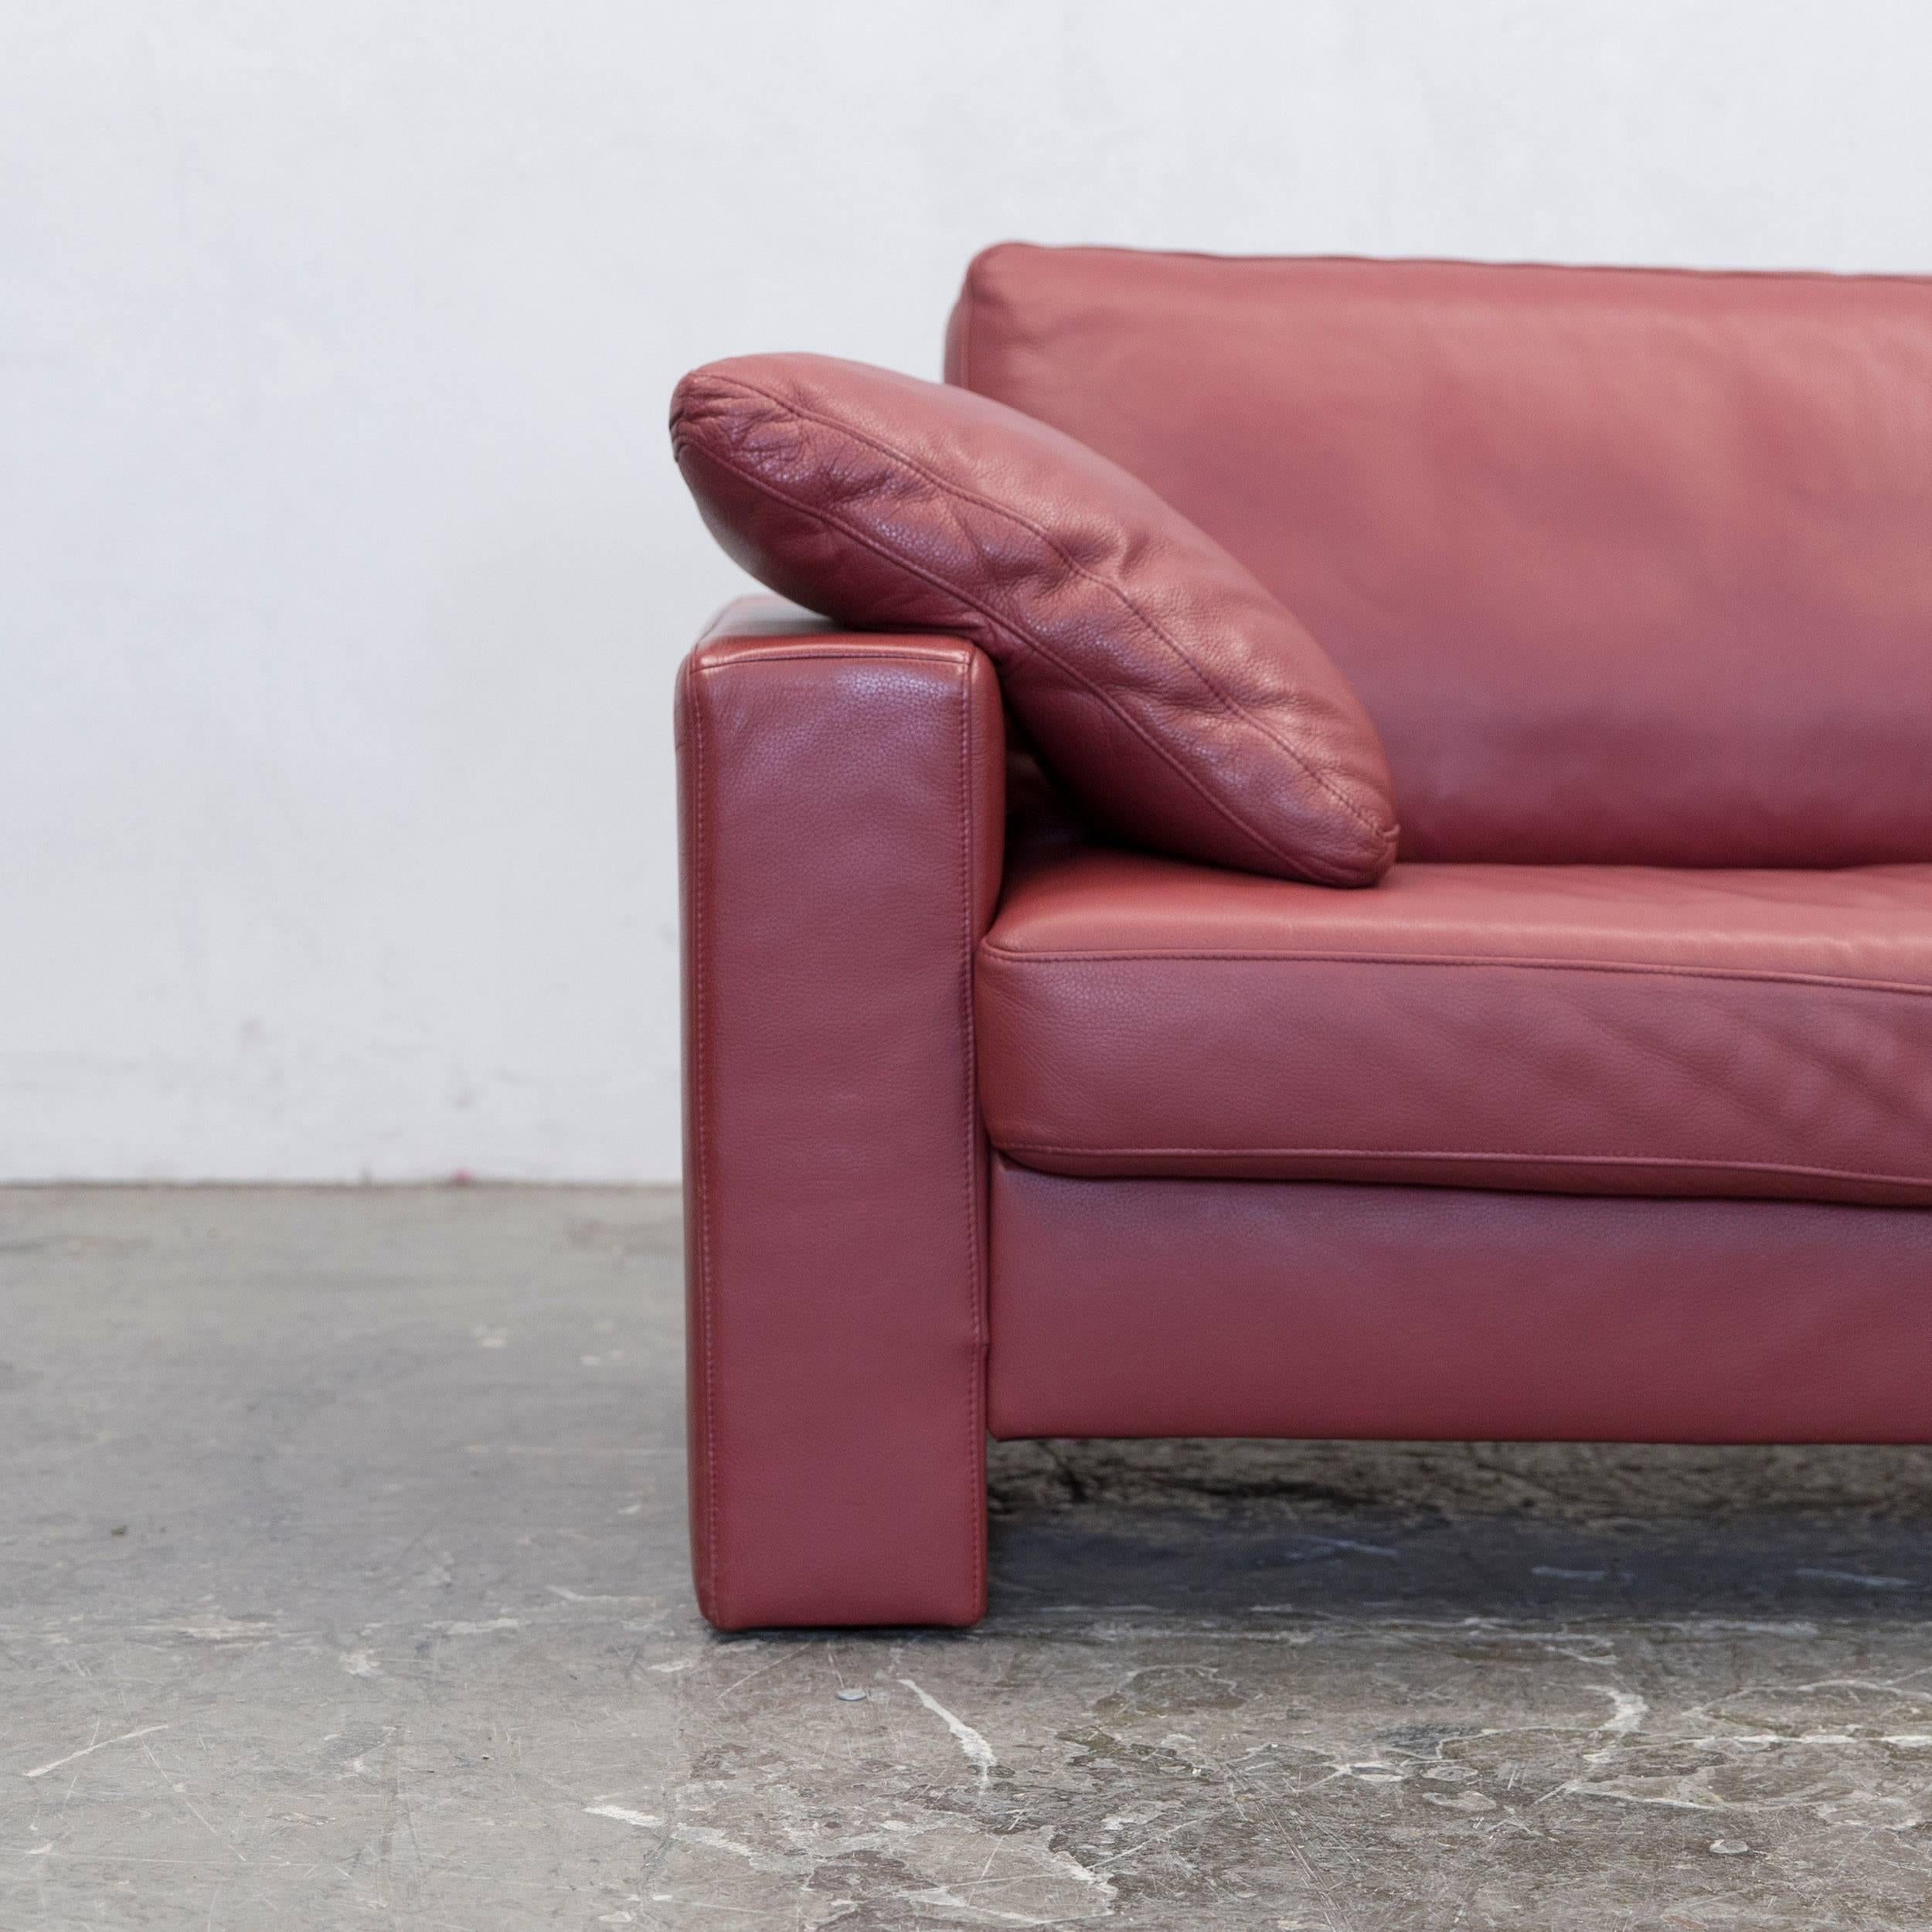 Red colored original Ewald Schillig designer two-seat couch, in a minimalistic and modern design, made for pure comfort.